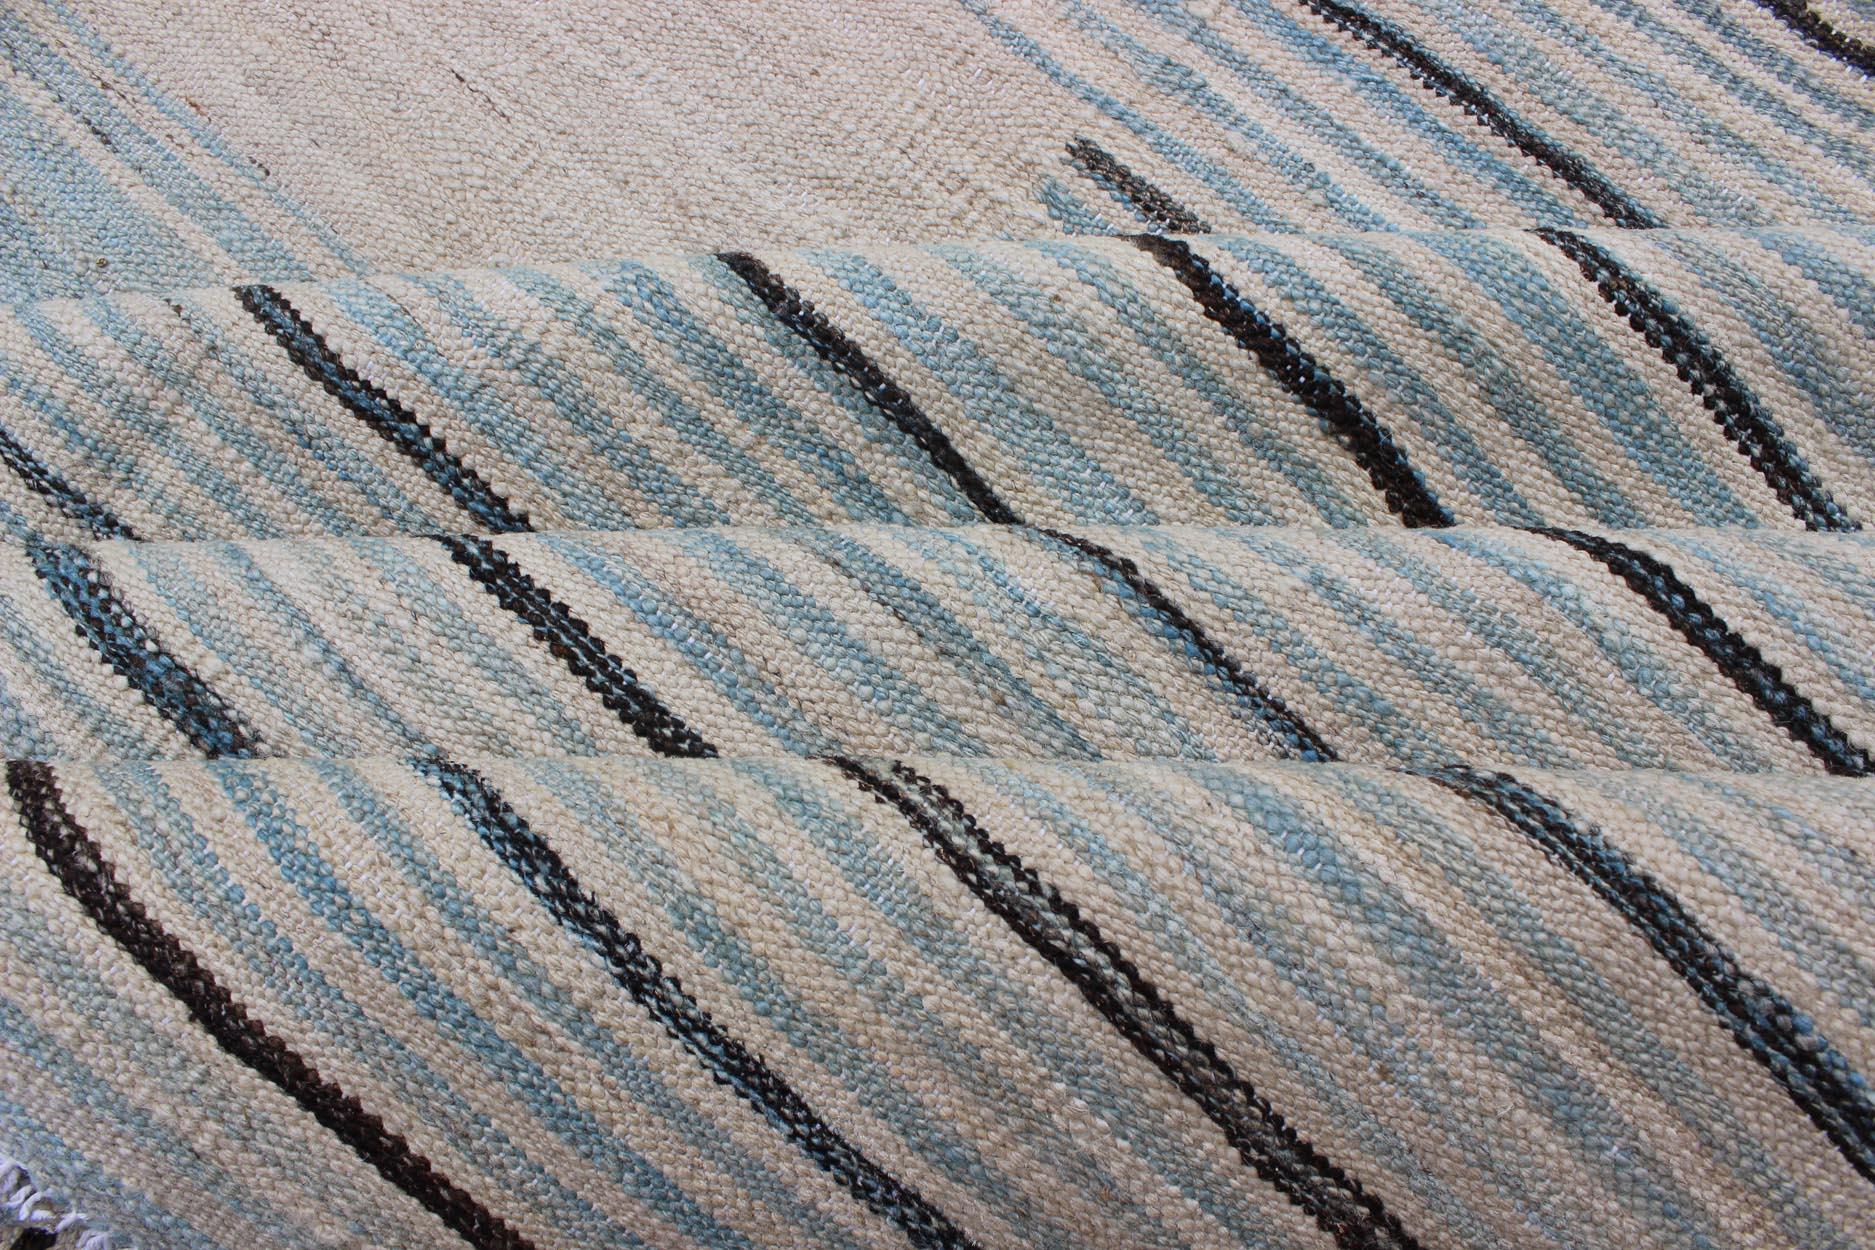 Contemporary Modern Flat-Weave Kilim Rug in Three Panel Striped Design in Ocean Blue & Taupe